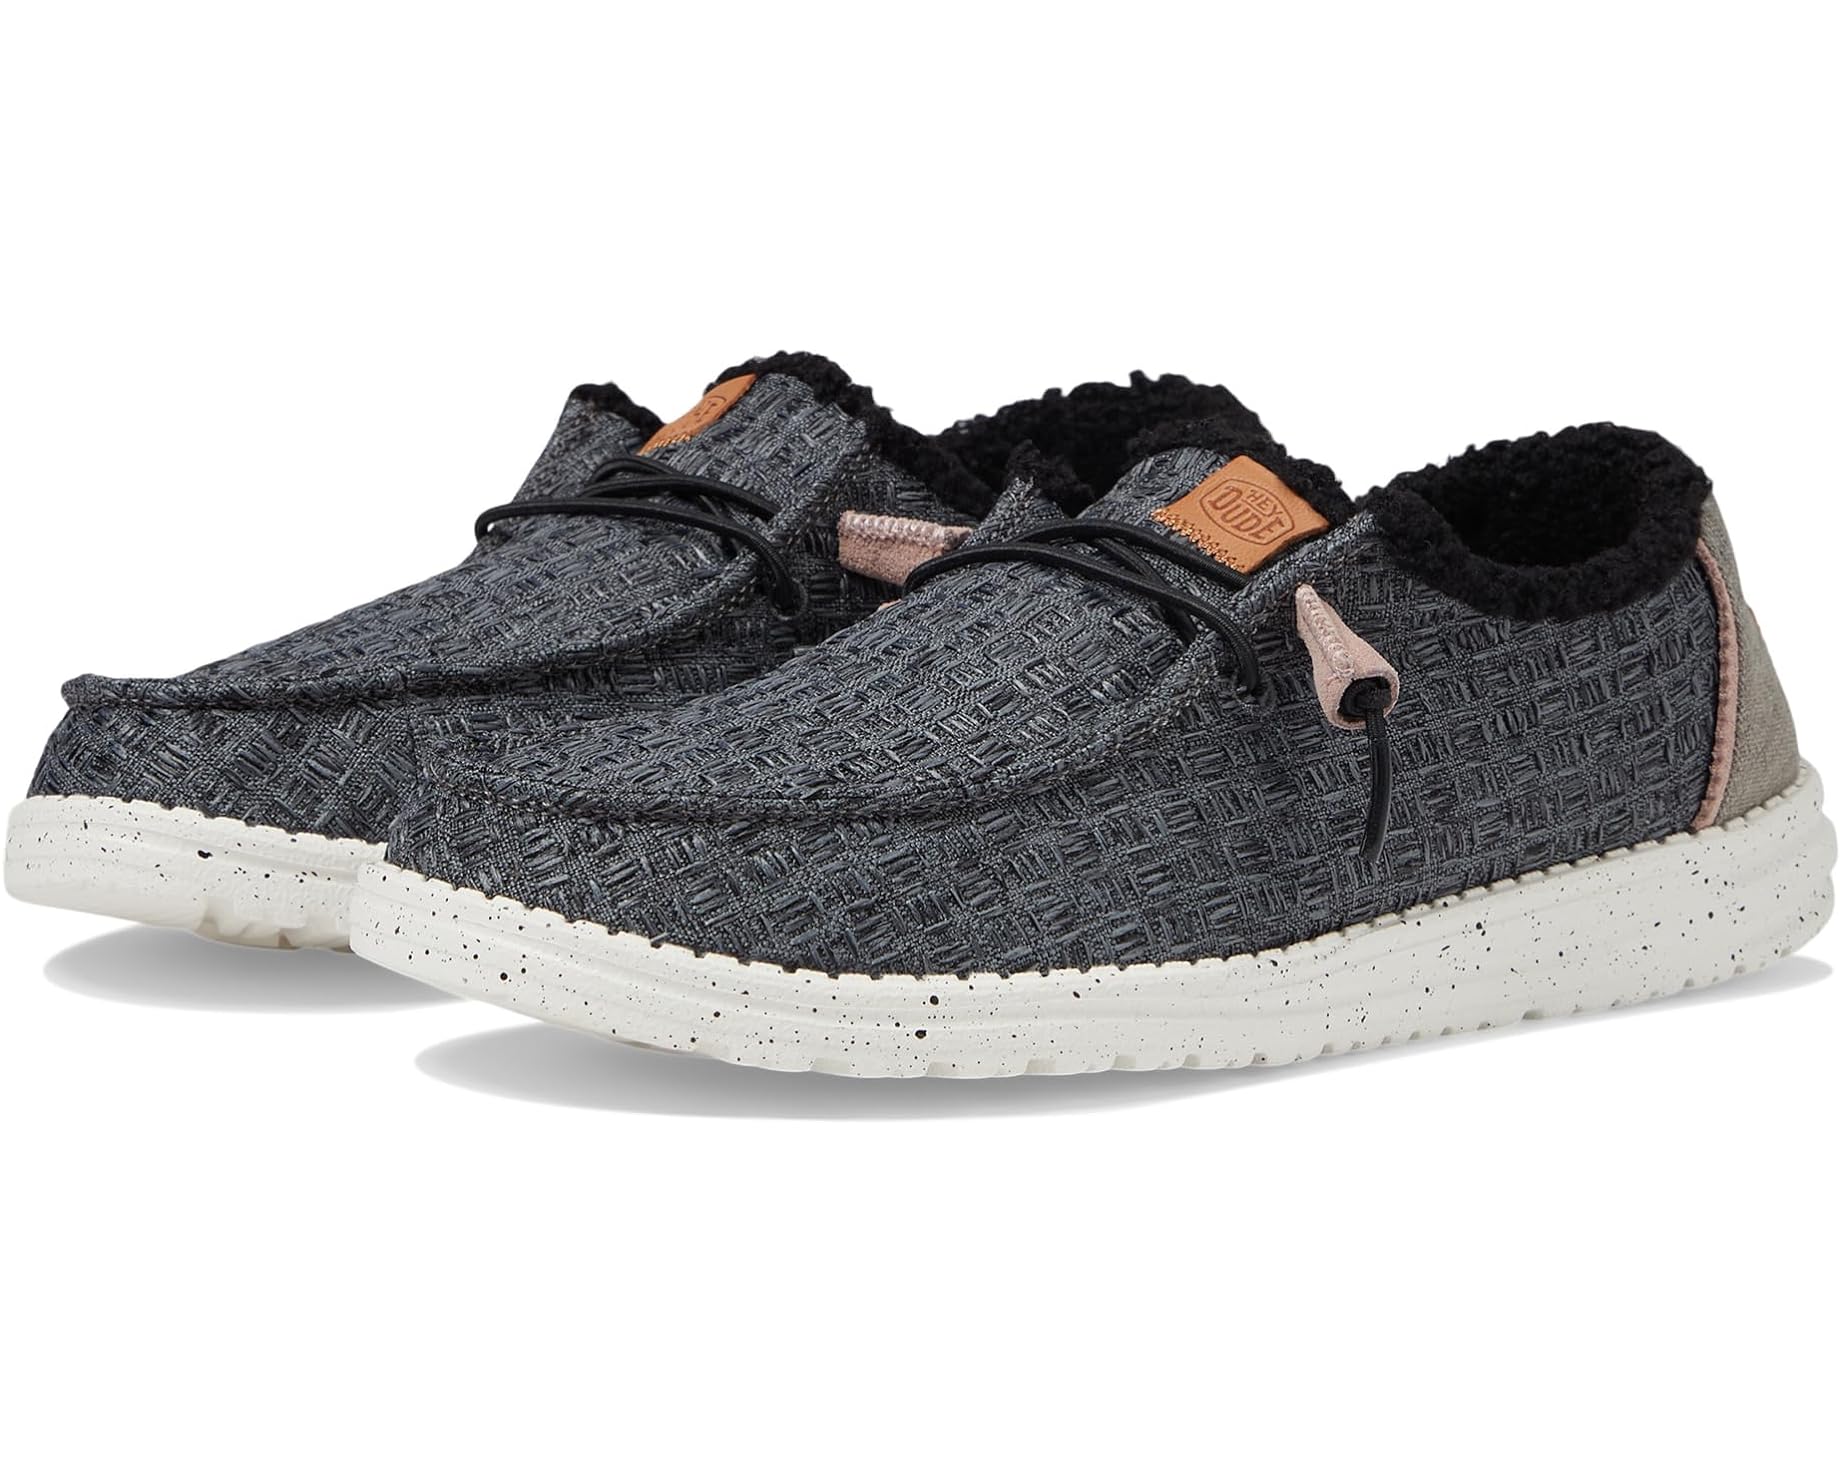 Hey Dude Women's Wendy Warmth Shoes (Charcoal) $25.19 + Free Shipping